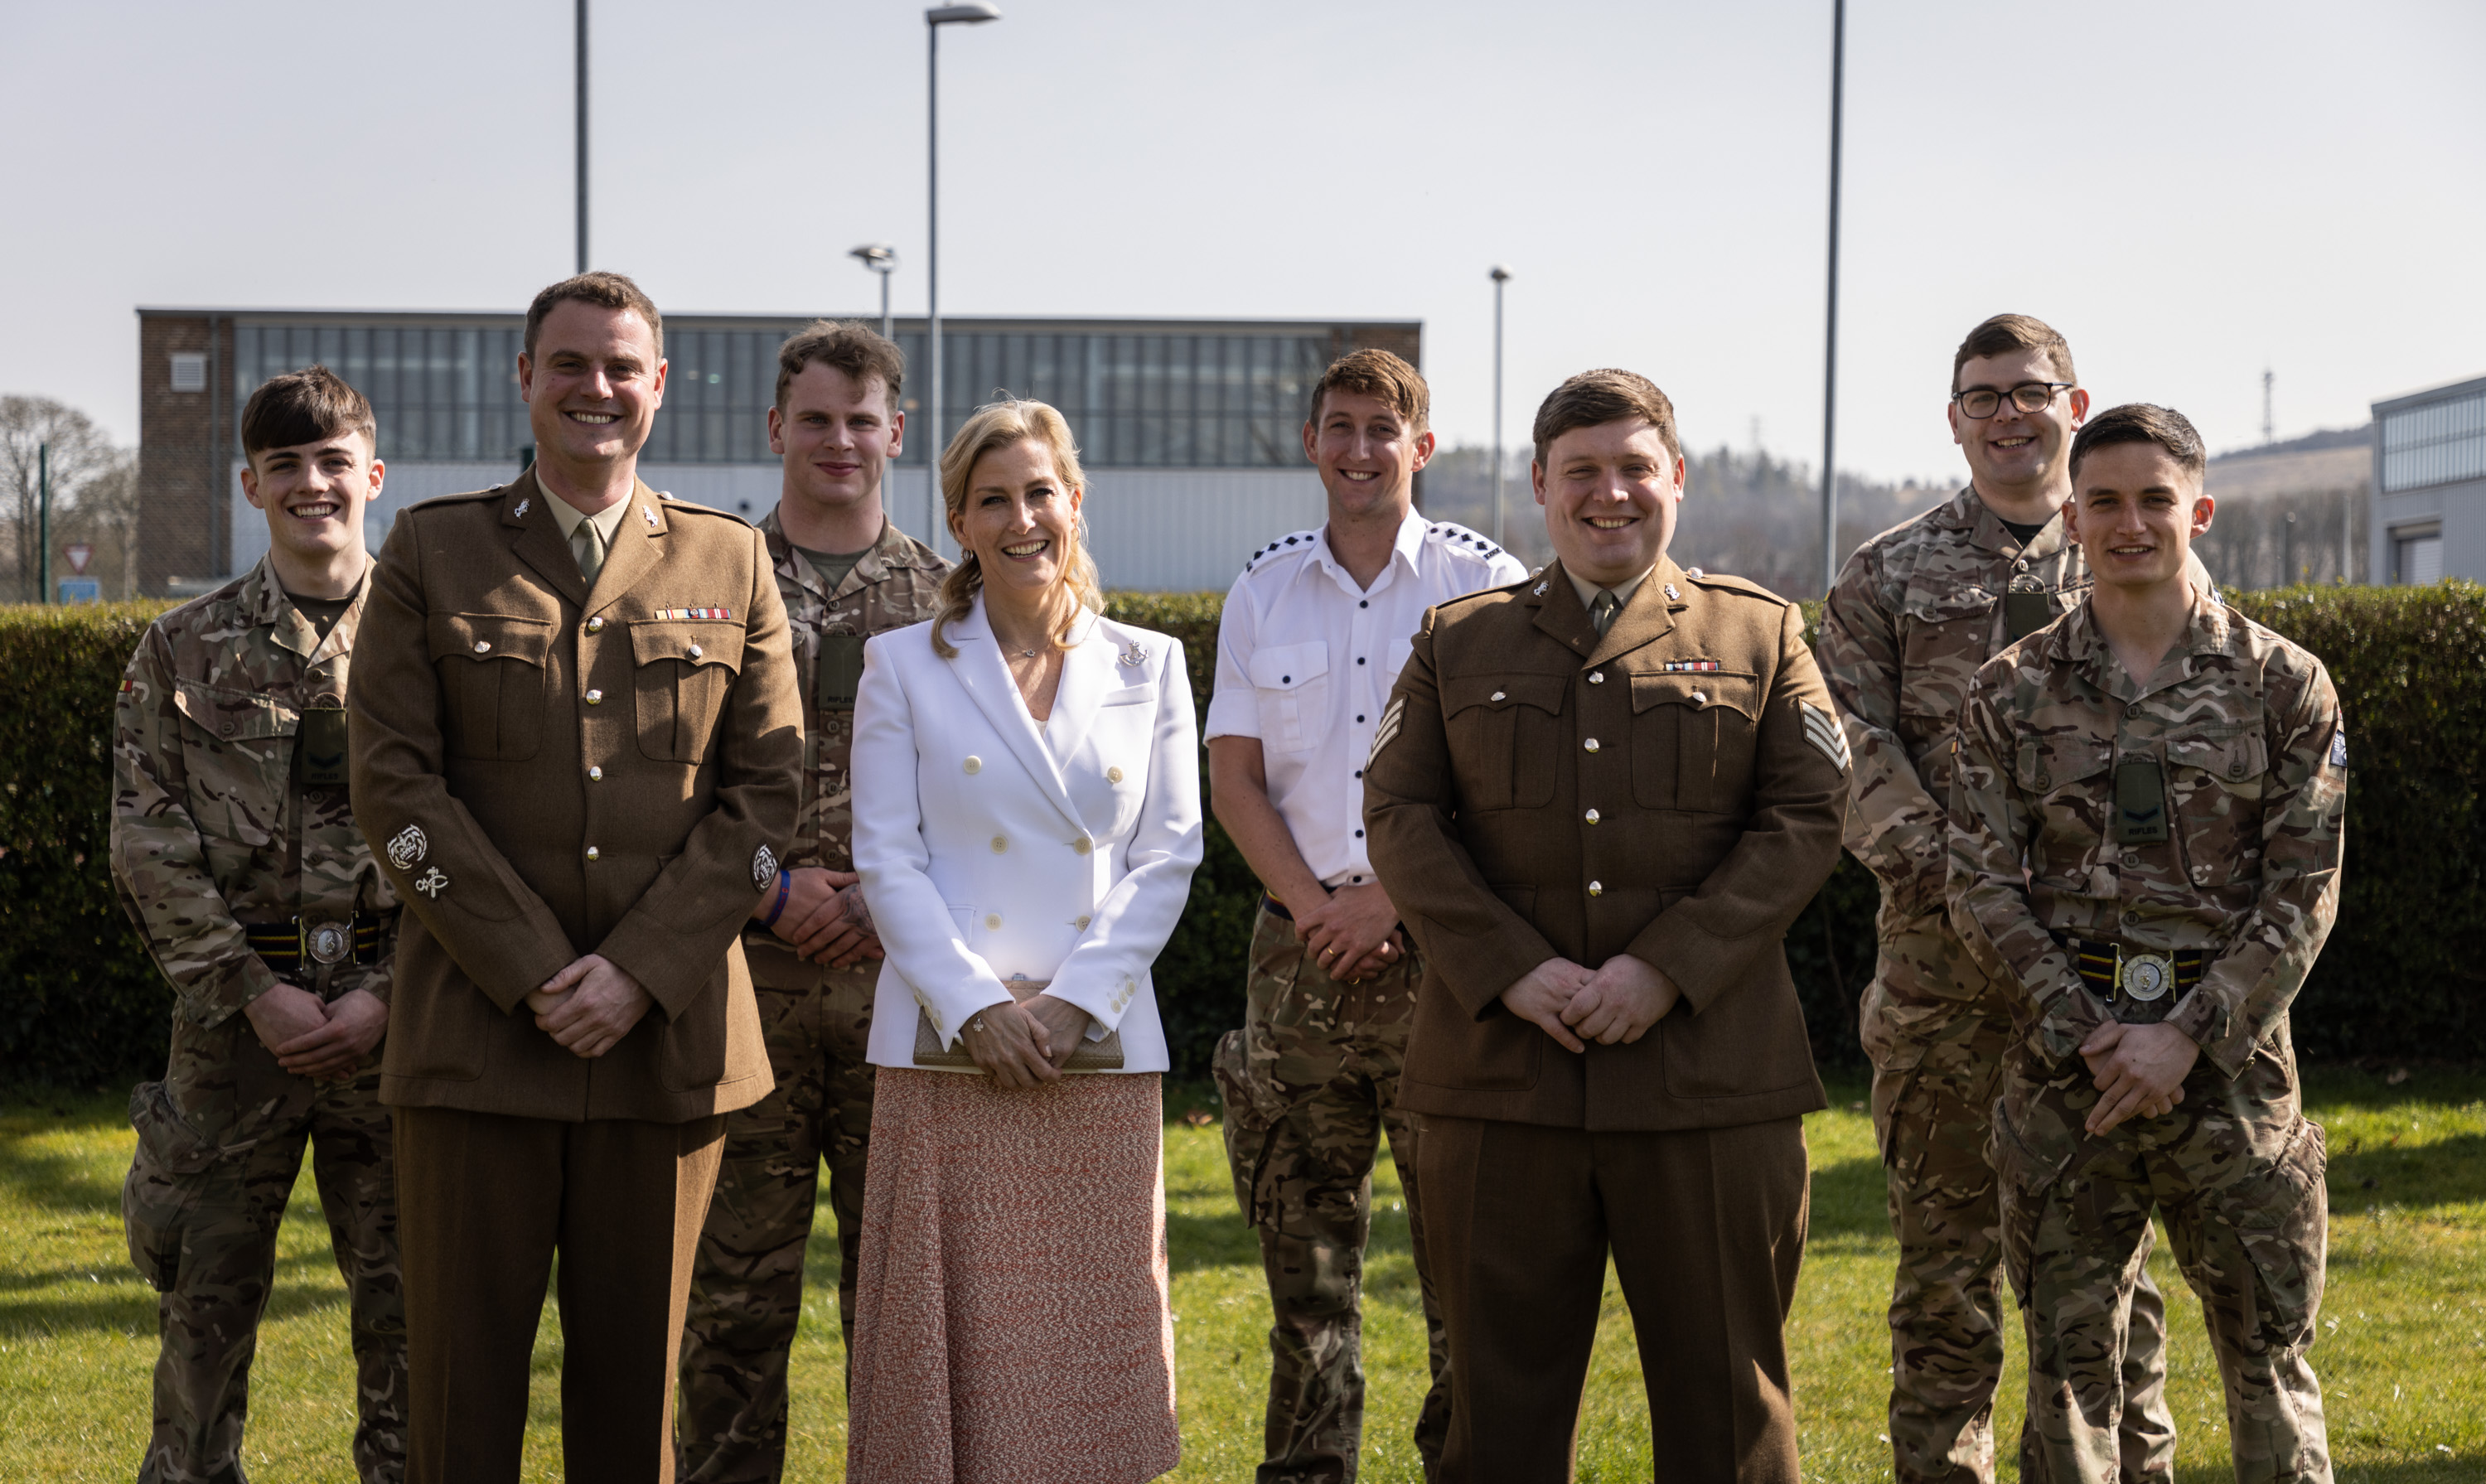 The countess meeting members of the Royal Electrical and Mechanical Engineers last week 